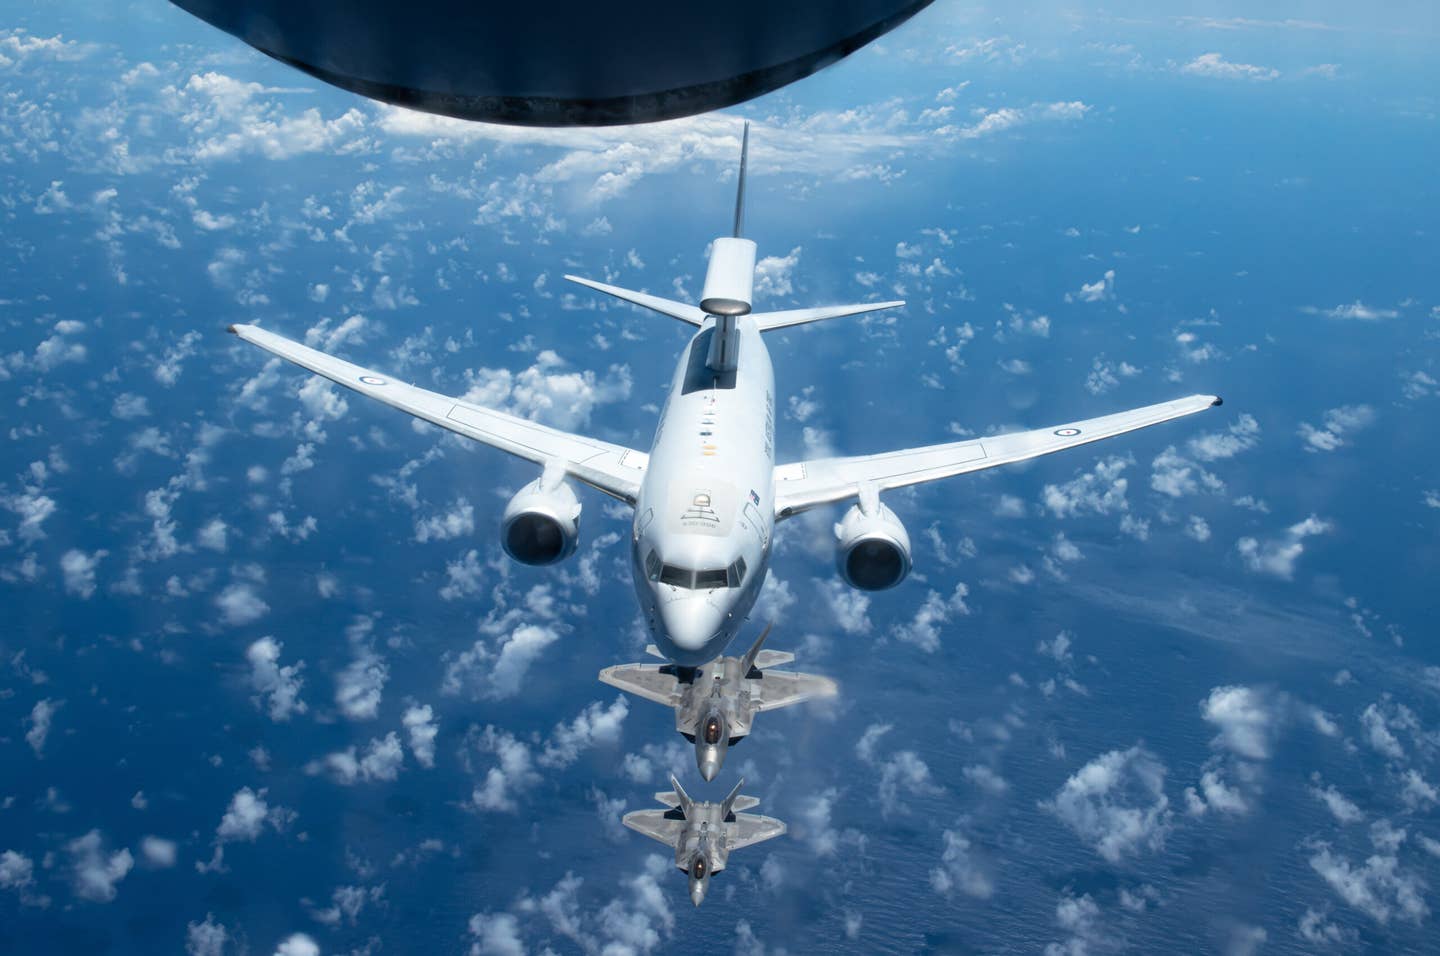 A Royal Australian Air Force E-7A Wedgetail, operated by No. 2 Squadron based at RAAF Base Williamtown, Australia, flies in formation with Hawaii Air National Guard F-22 Raptors April 21, 2021, near Oahu, Hawaii. The command-and-control aircraft, traveled to Hawaii to participate in exercise Pacific Edge 21 and provide airborne early warning support to airborne participants. (U.S. Air National Guard photo by Staff Sgt. John Linzmeier)